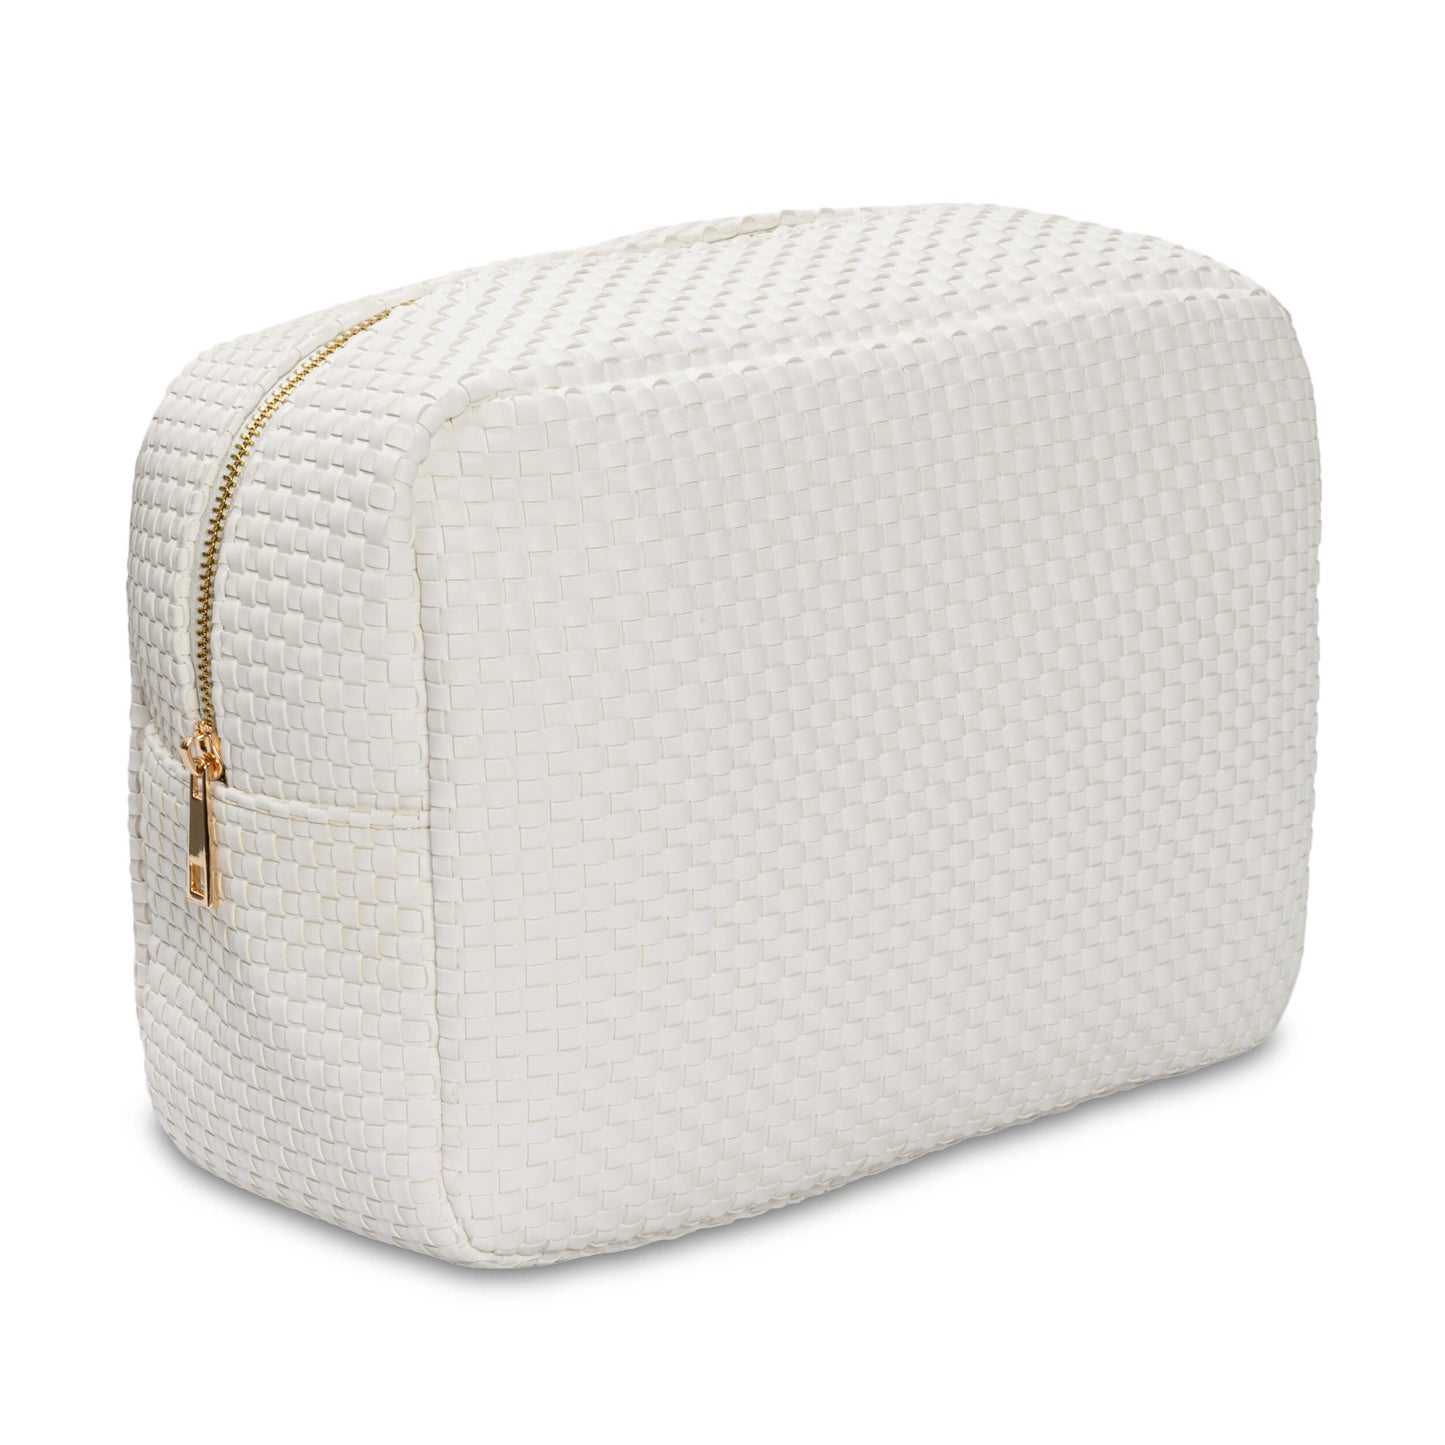 The Evelyn Big Pouch - Peaceful White